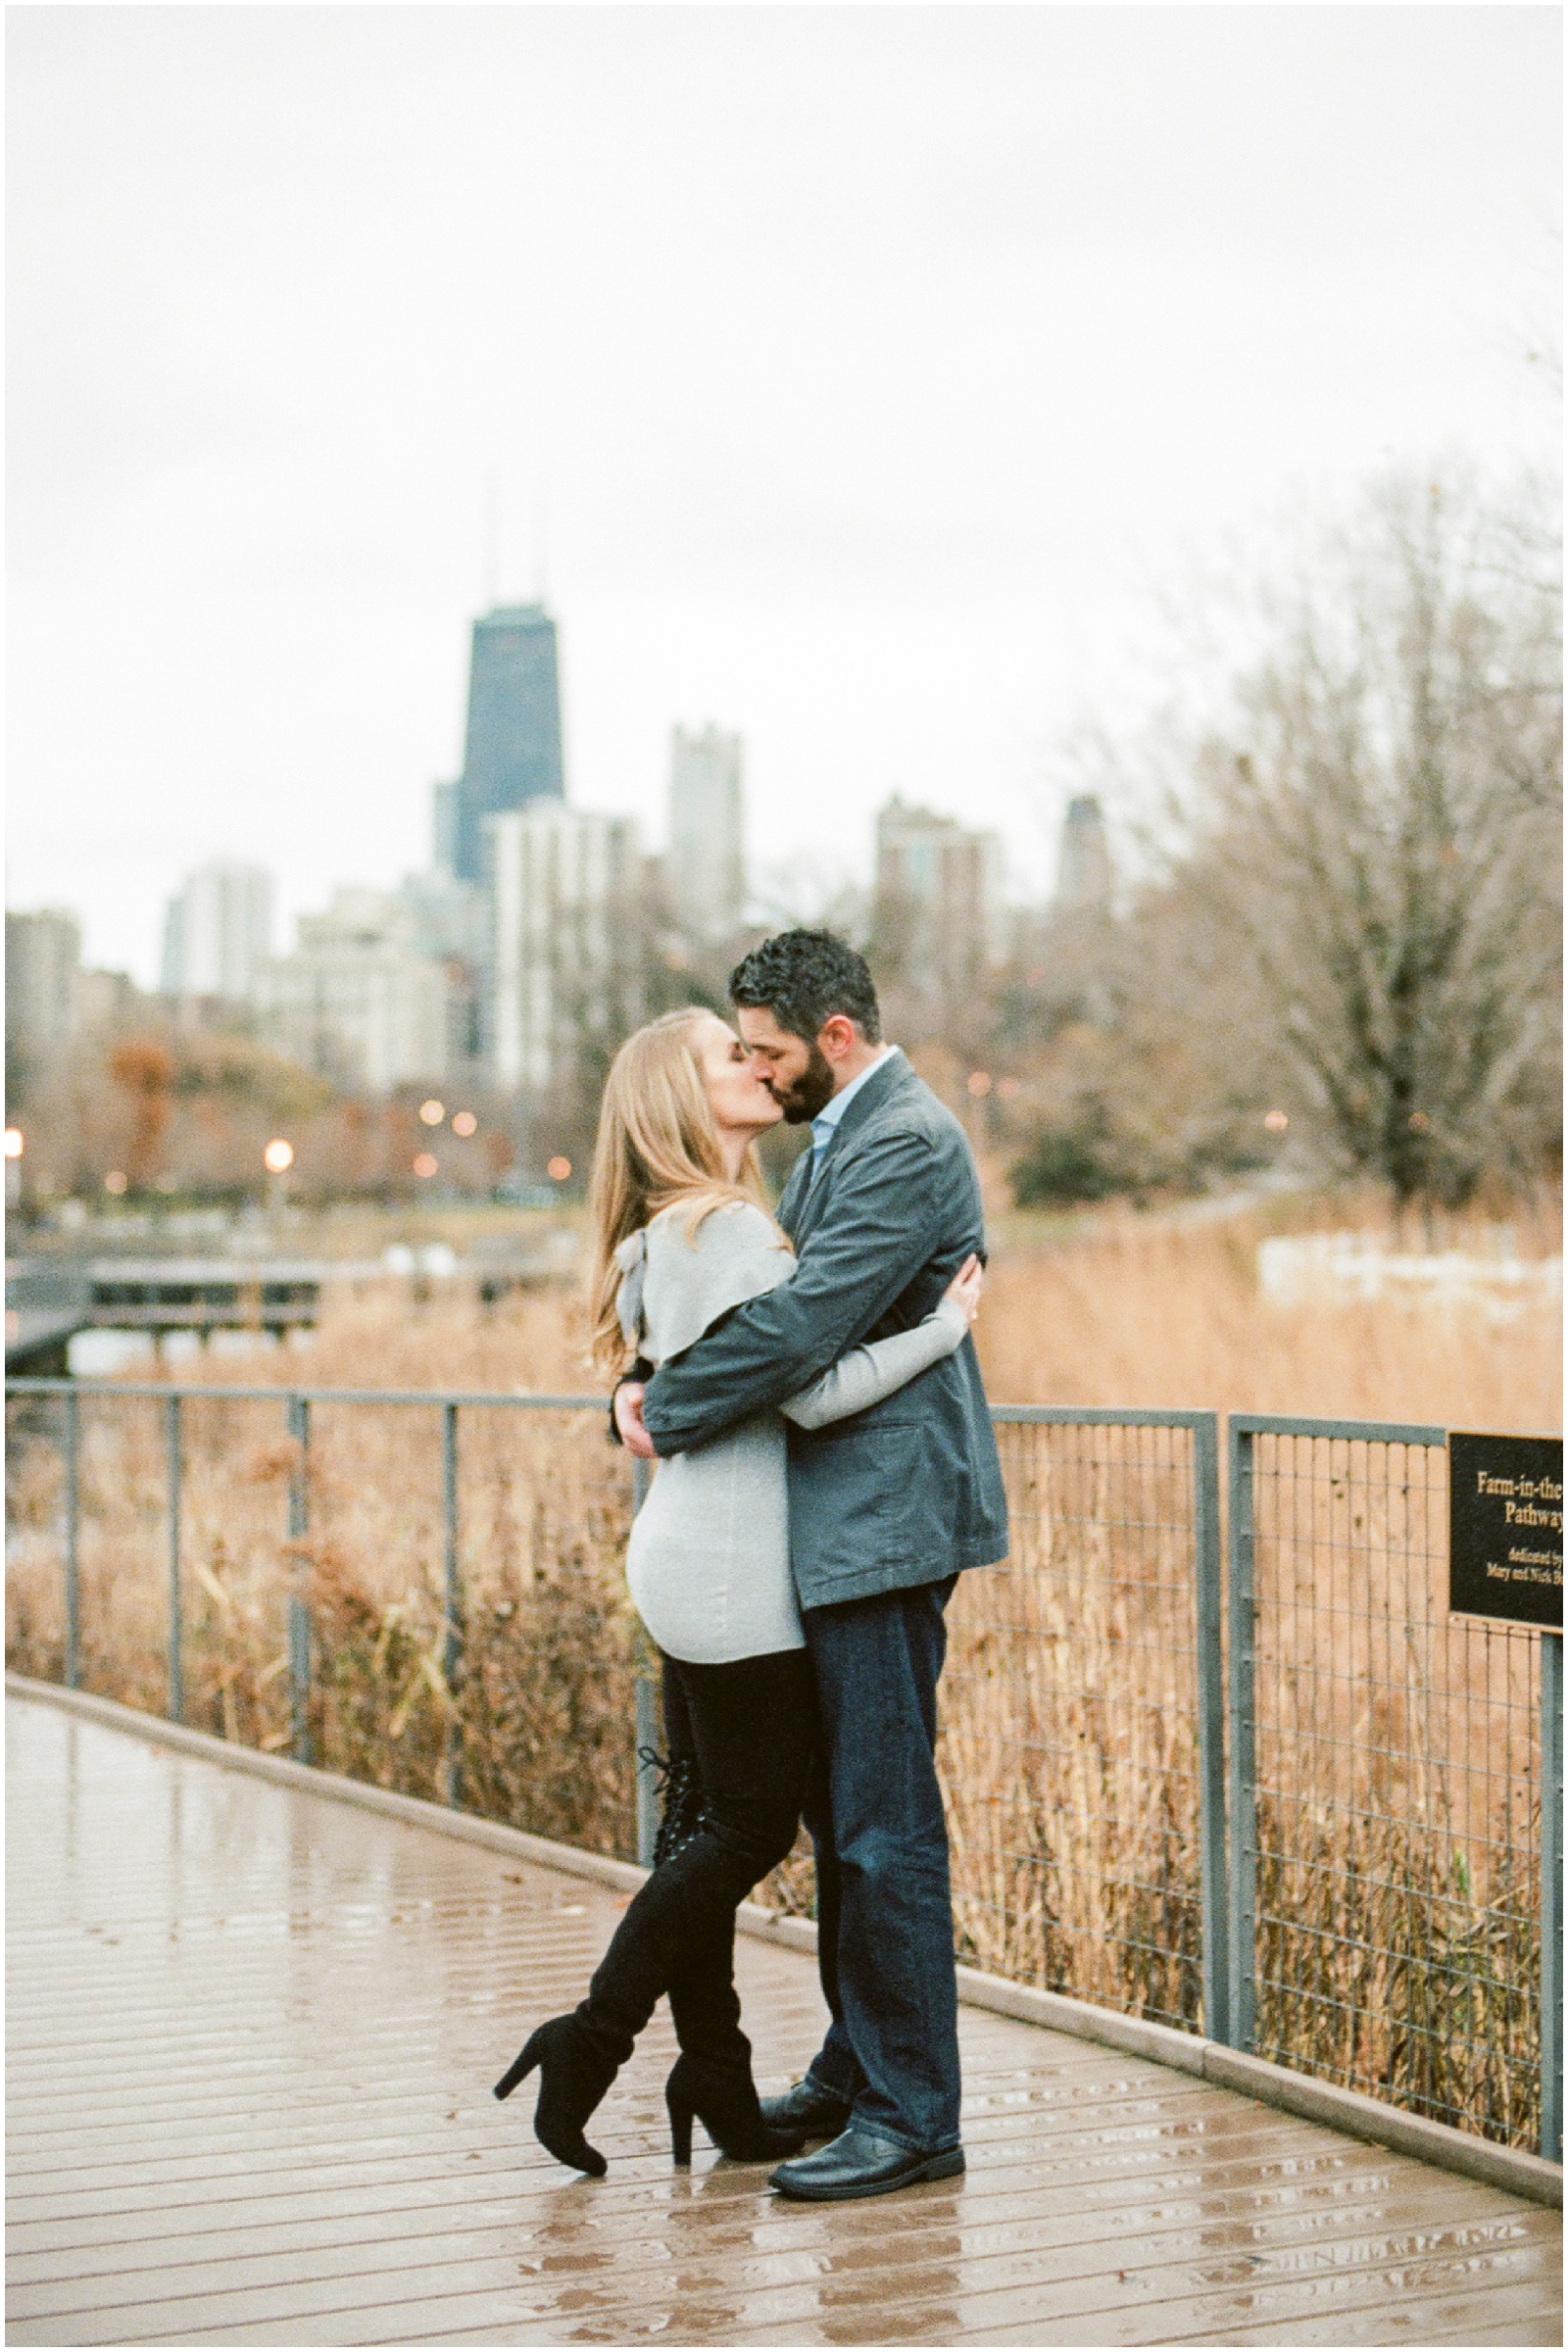 couple hugging on nature boardwalk overlooking city skyline for engagement photos